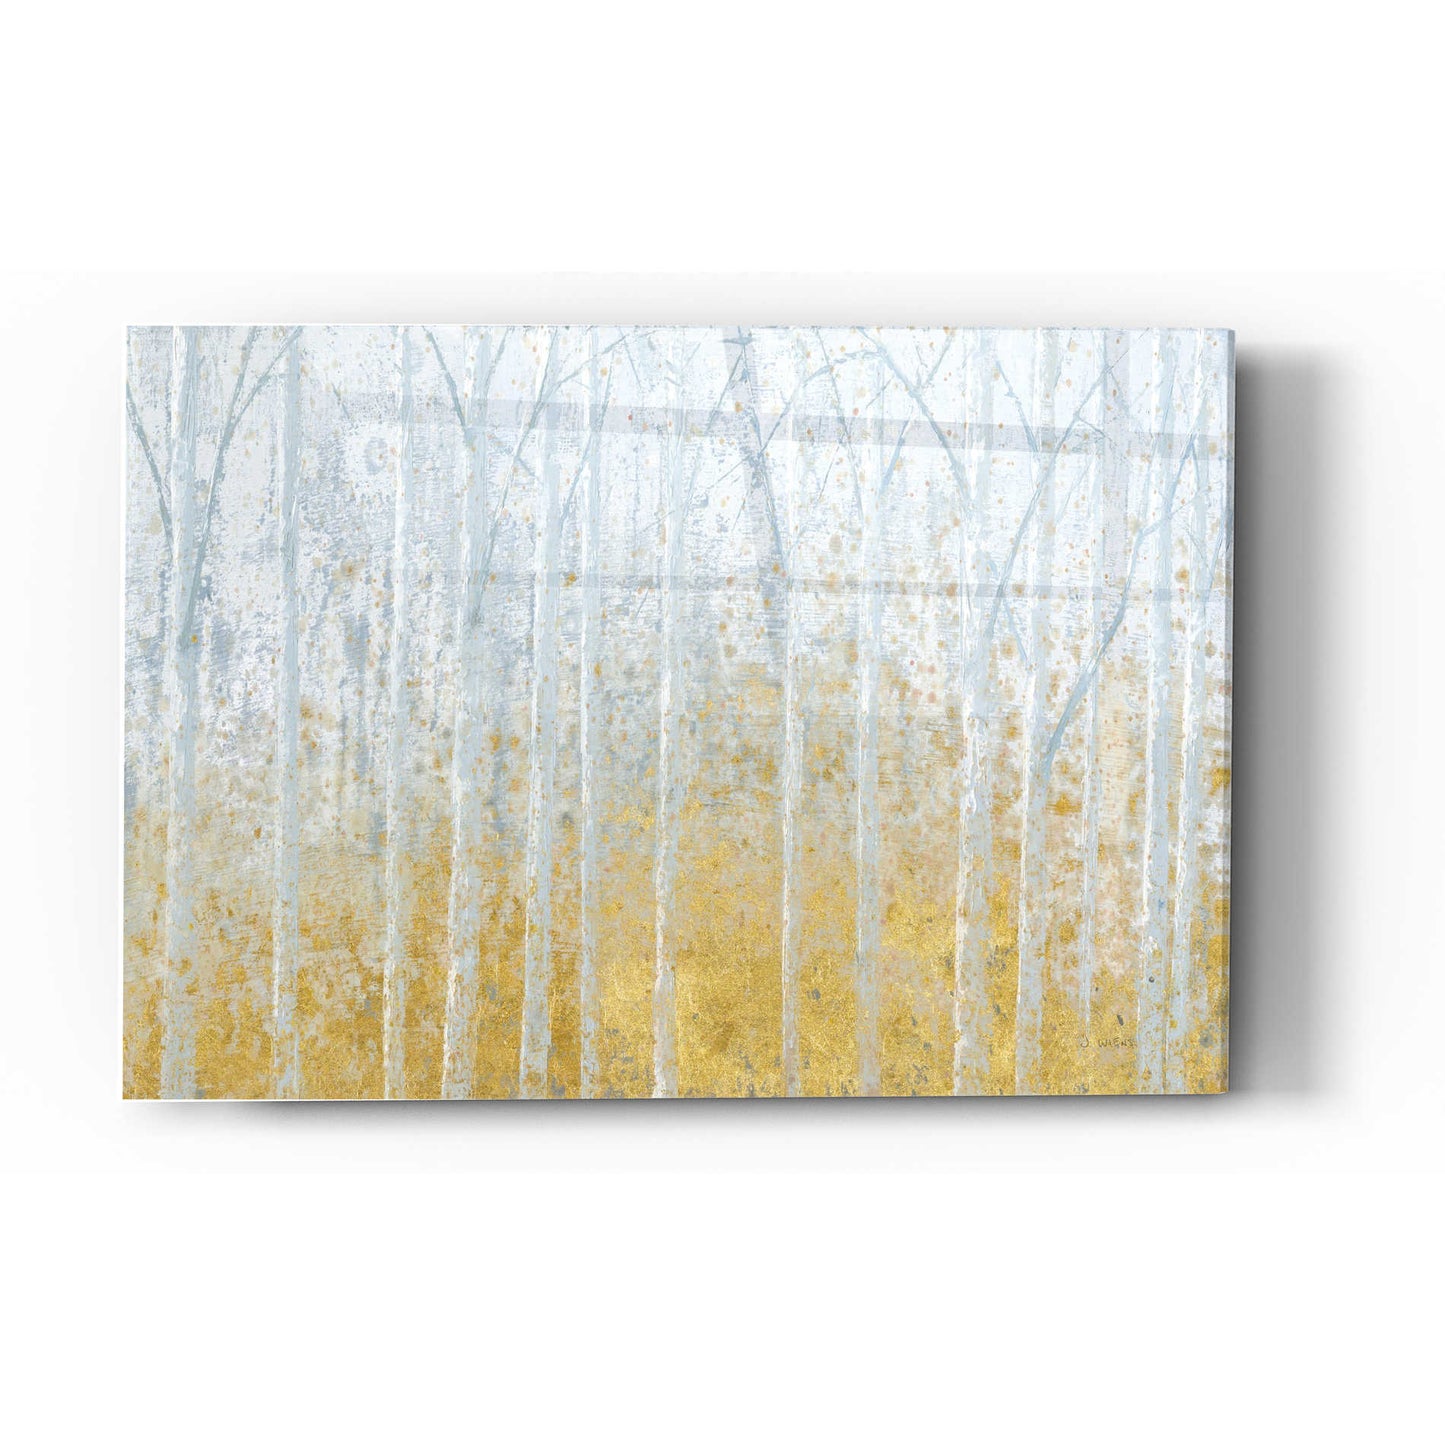 Epic Art 'Silver Water GOLD' by James Wiens, Acrylic Glass Wall Art,16x24